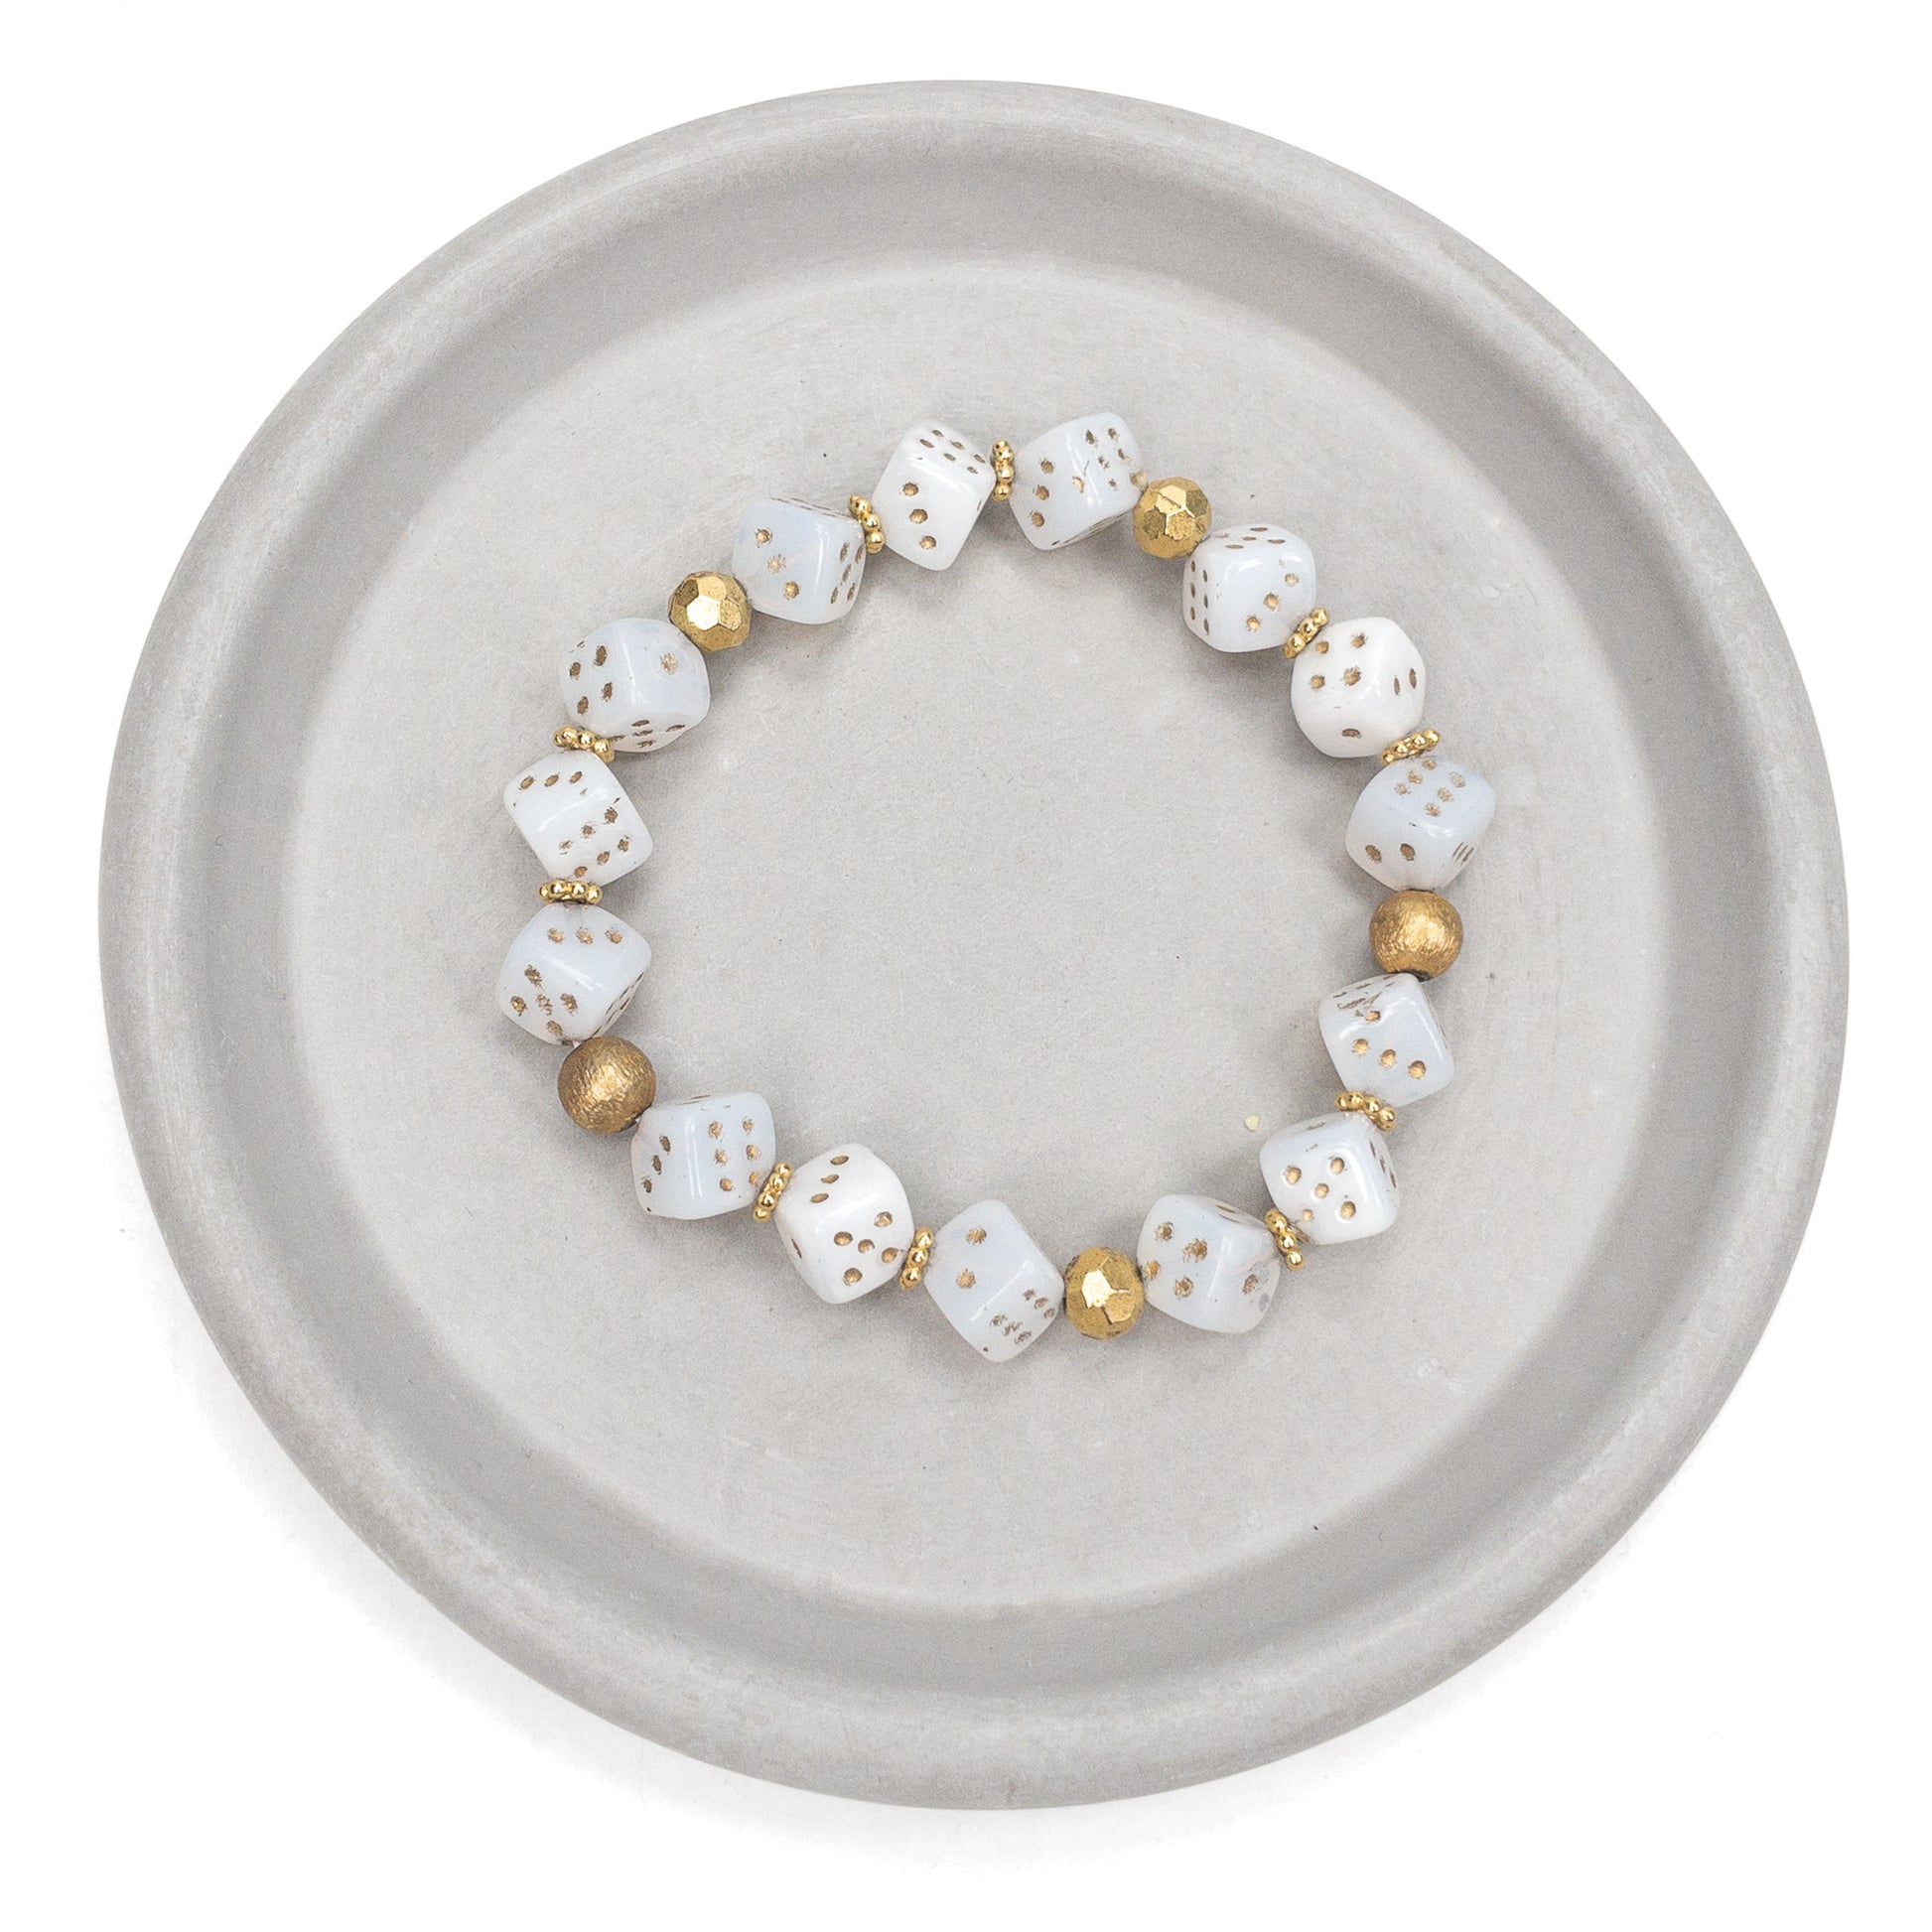 Dice (8mm) White Opaline with Gold Wash - 15 pc. Strand